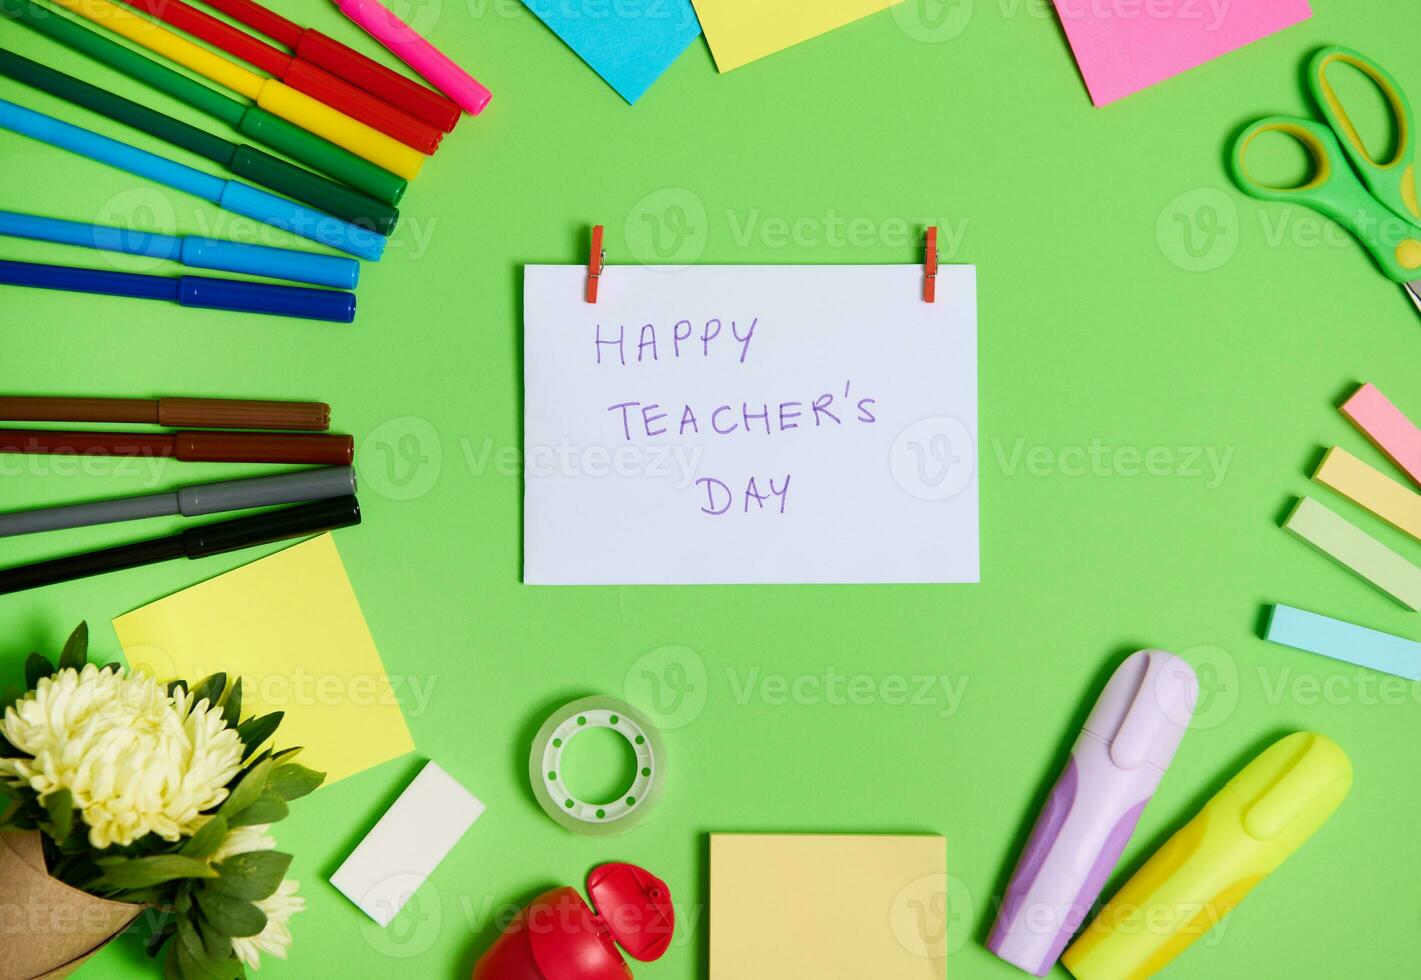 Top view of colorful assortment of stationery office supplies and school accessories arranged in a circle, with white paper in the center with lettering Happy Teacher's Day photo